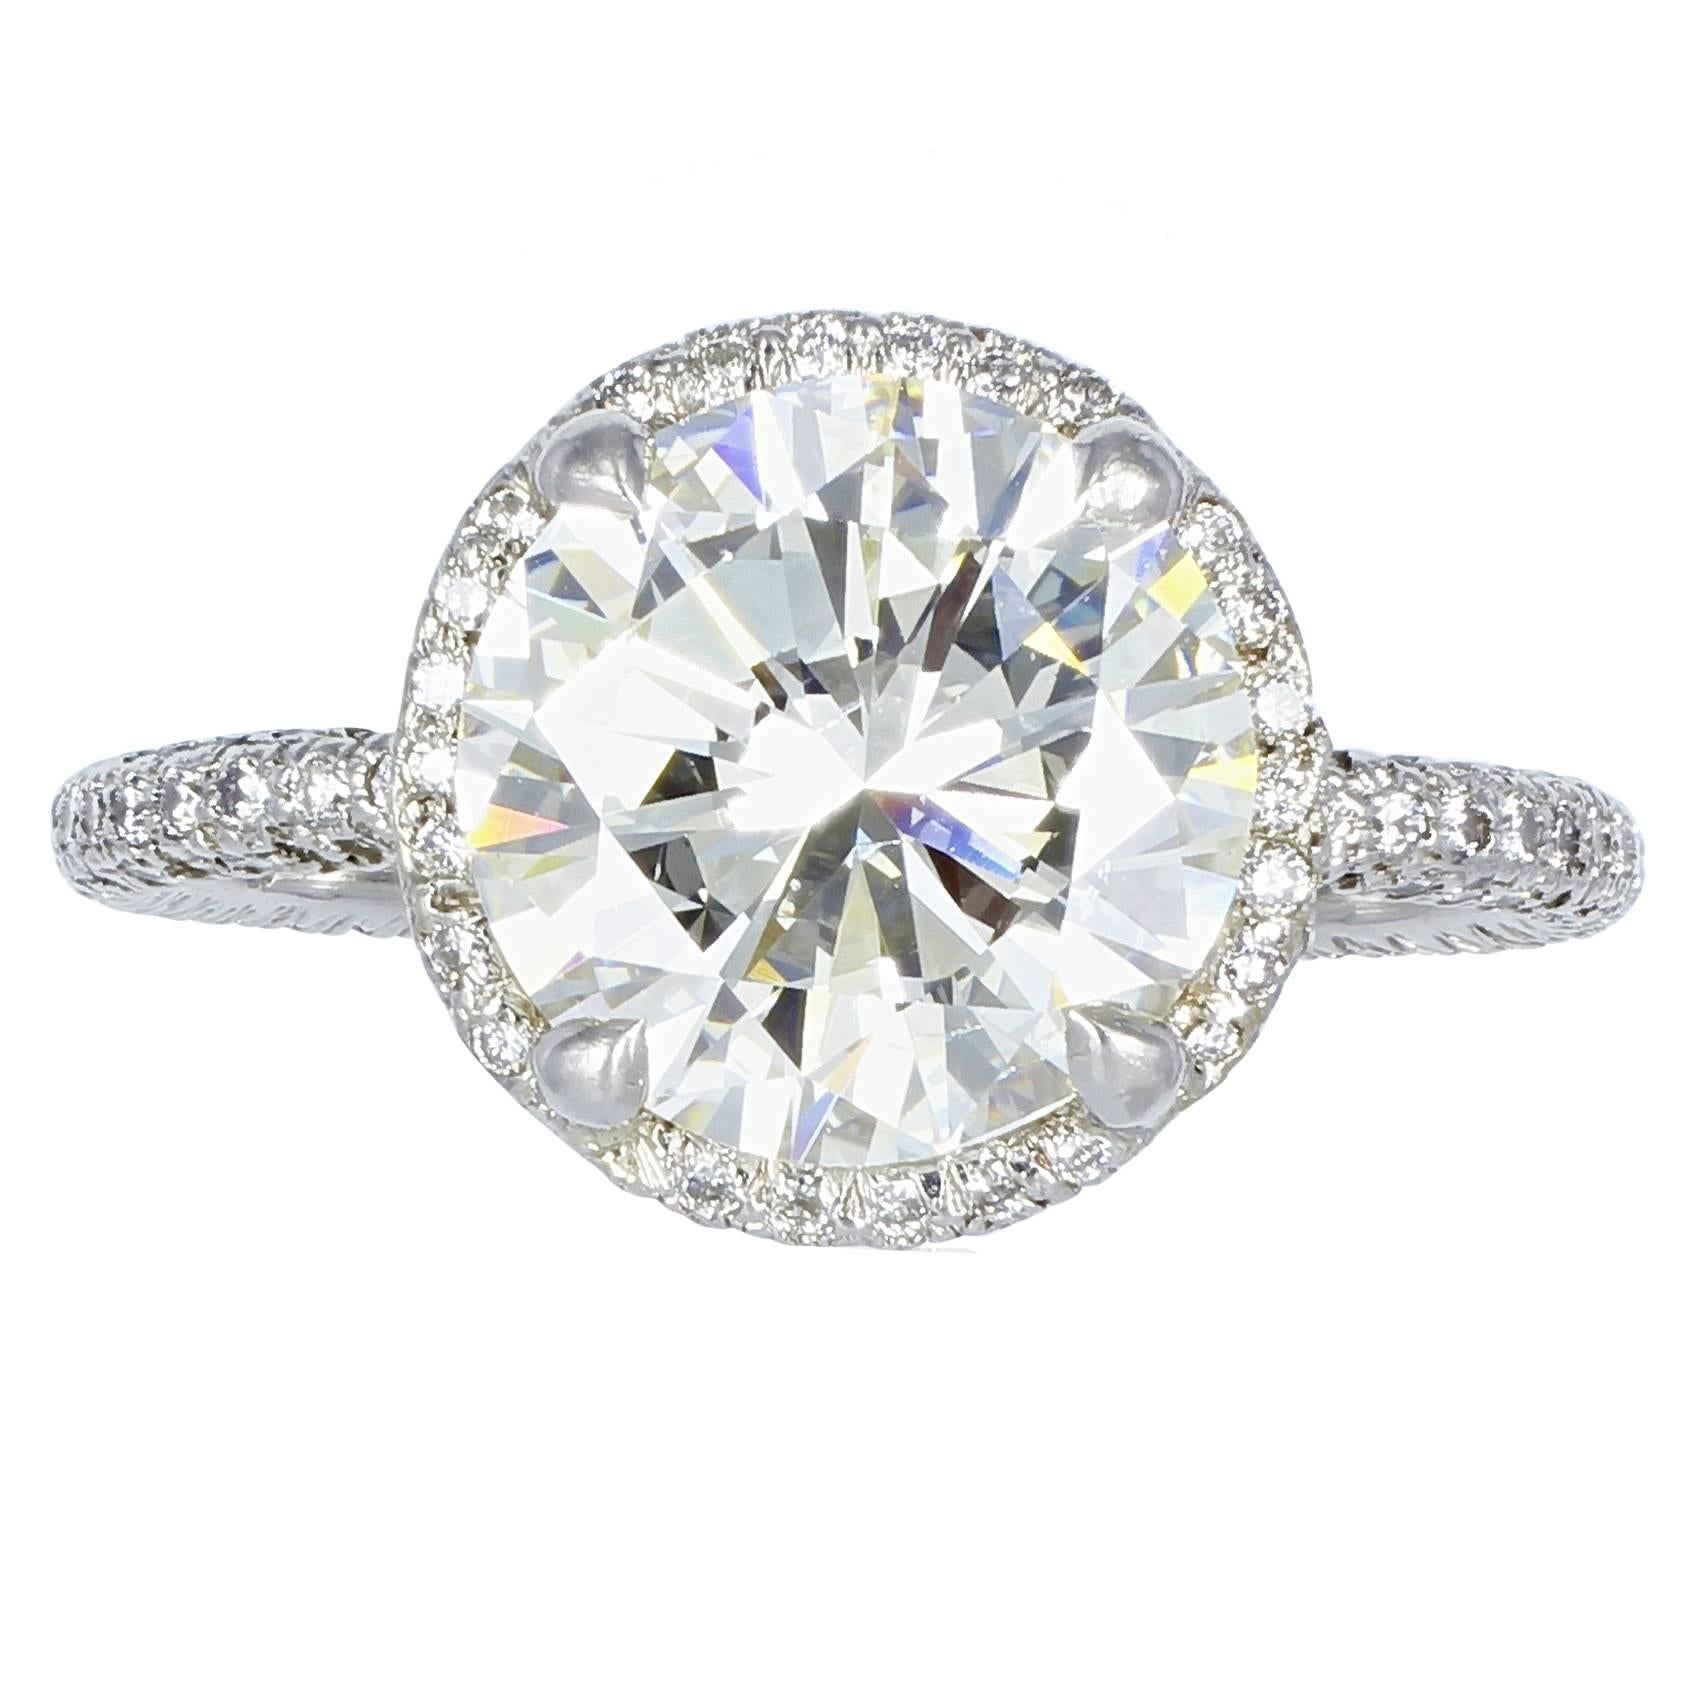 Fred Leighton 3.17 Carat Round Brilliant Cut Diamond GIA Certified Ring For Sale